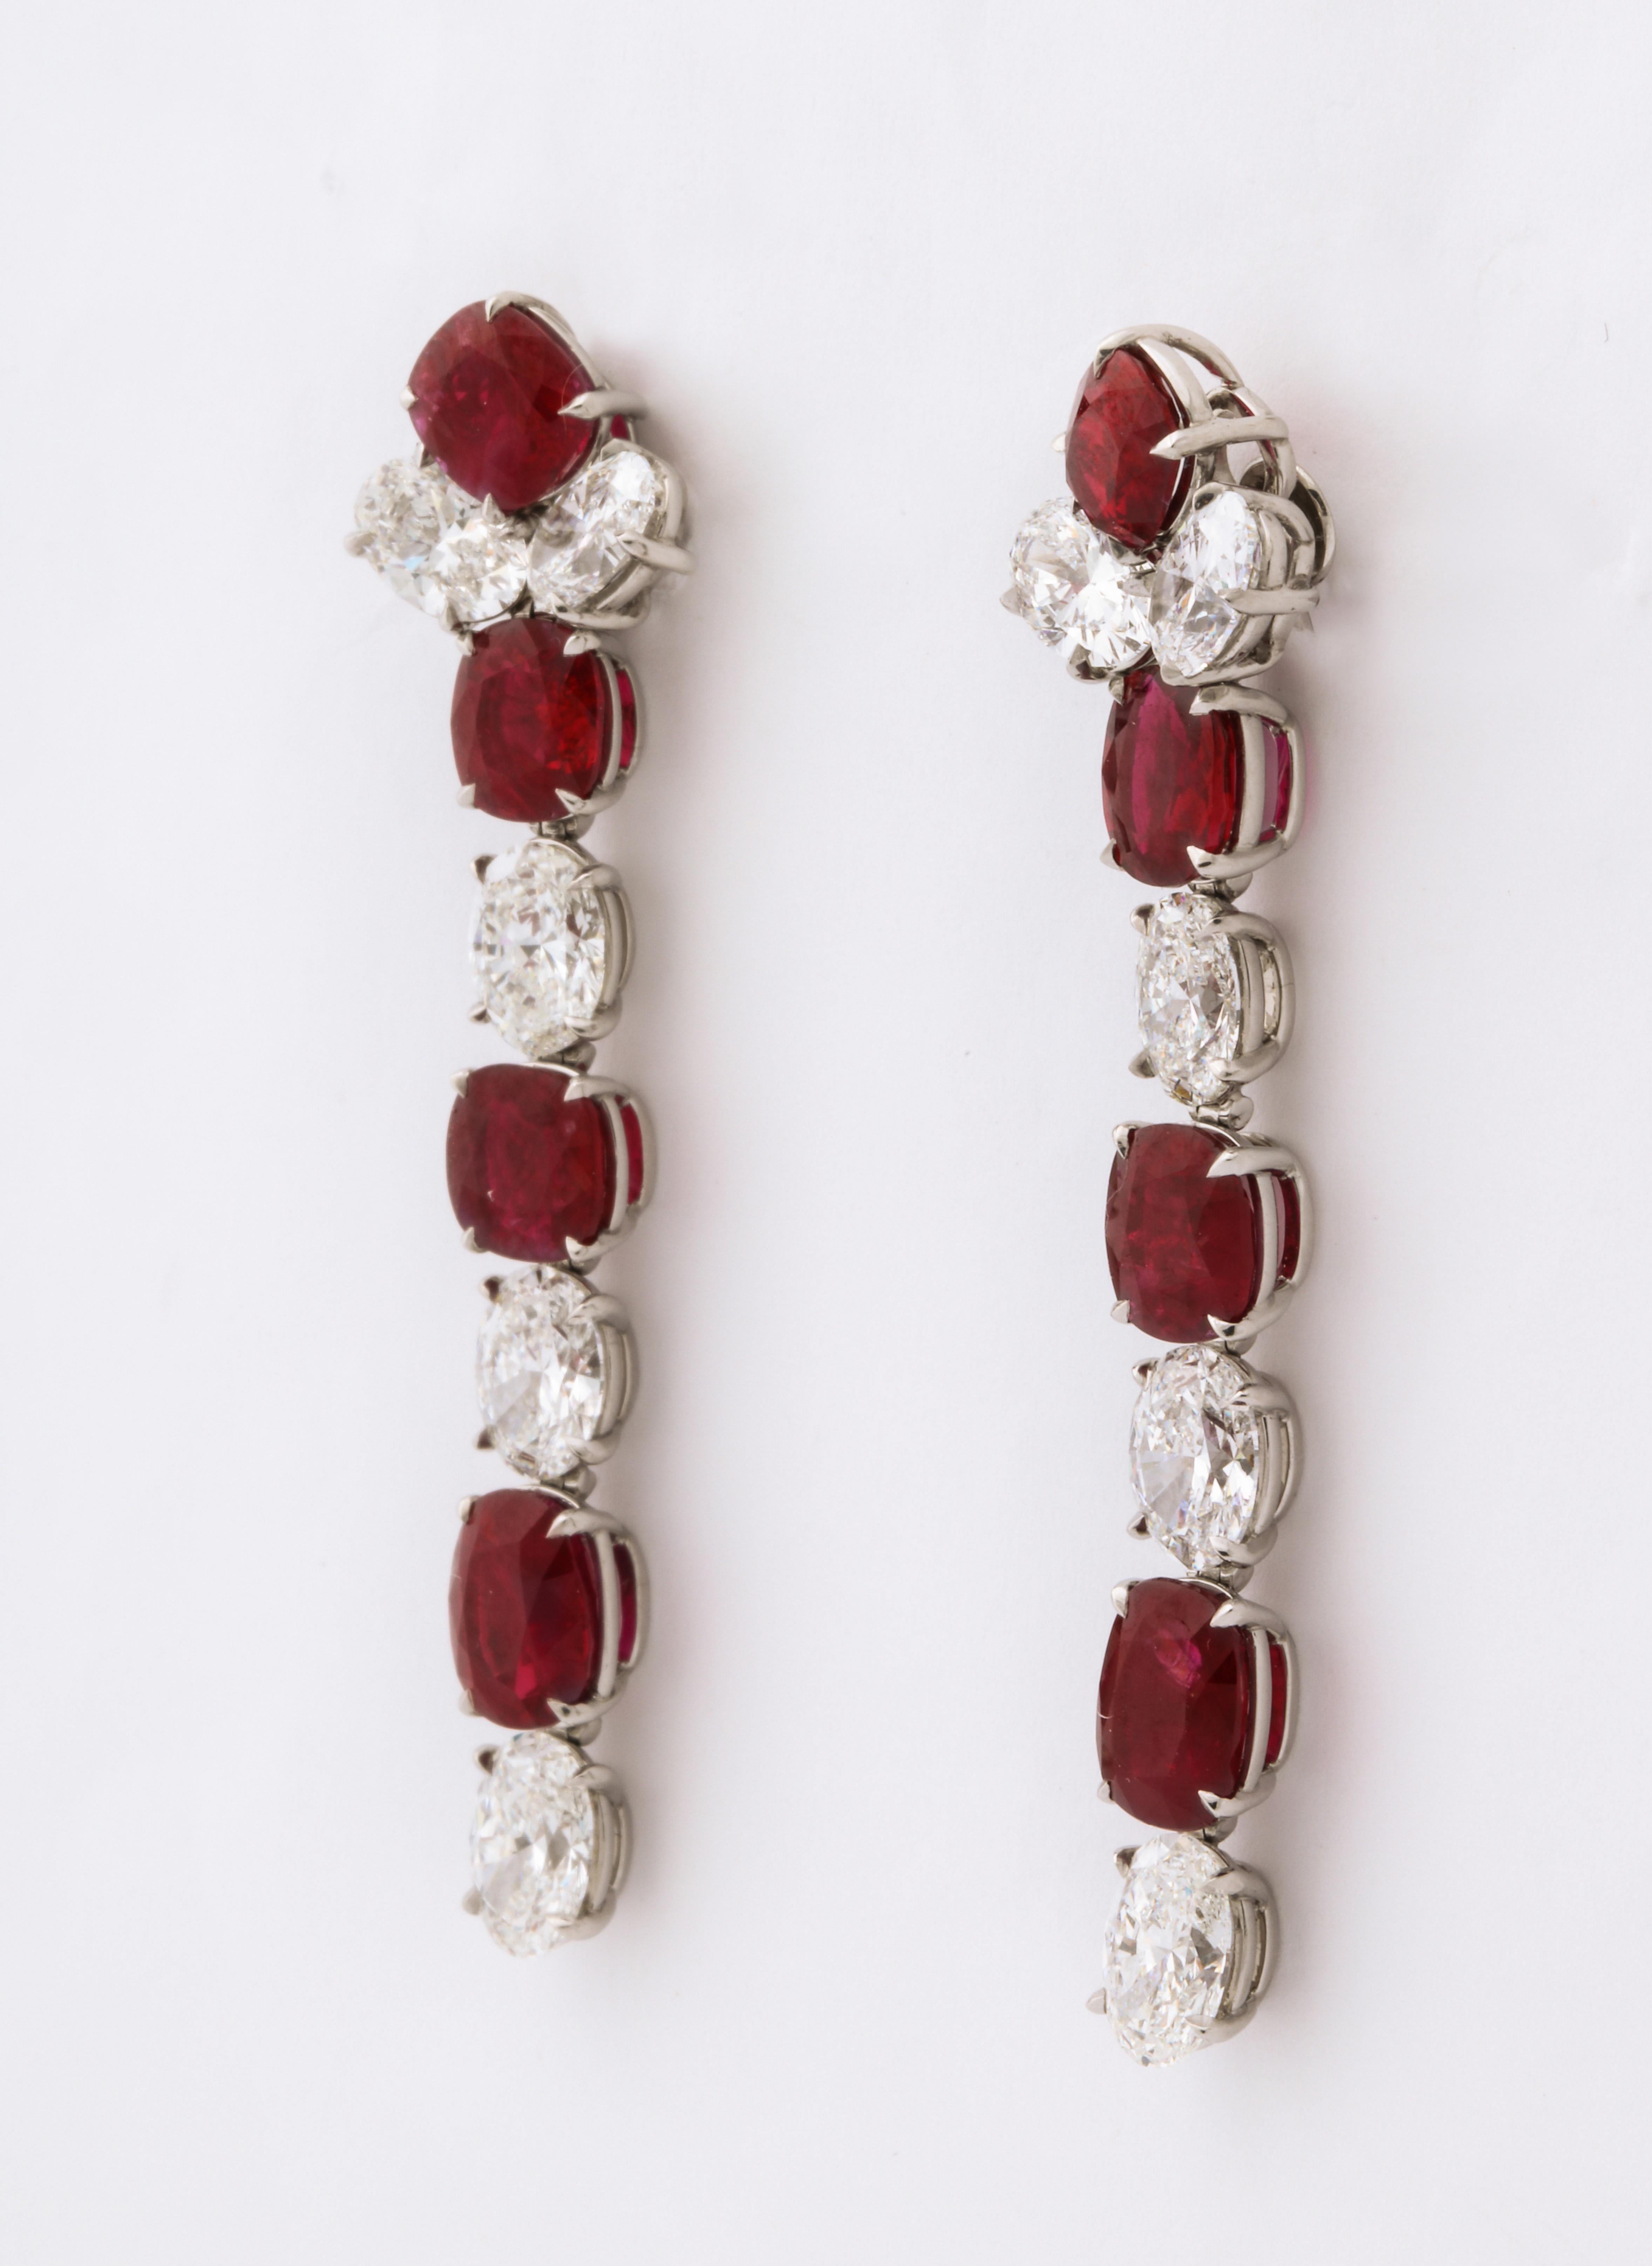 The combination of rare gemstones and superlative craftsmanship never fails to impress, and these elegant drop earrings are no exception.  Each stone has been carefully selected for it's beauty as well as it's matching characteristics.  Having made